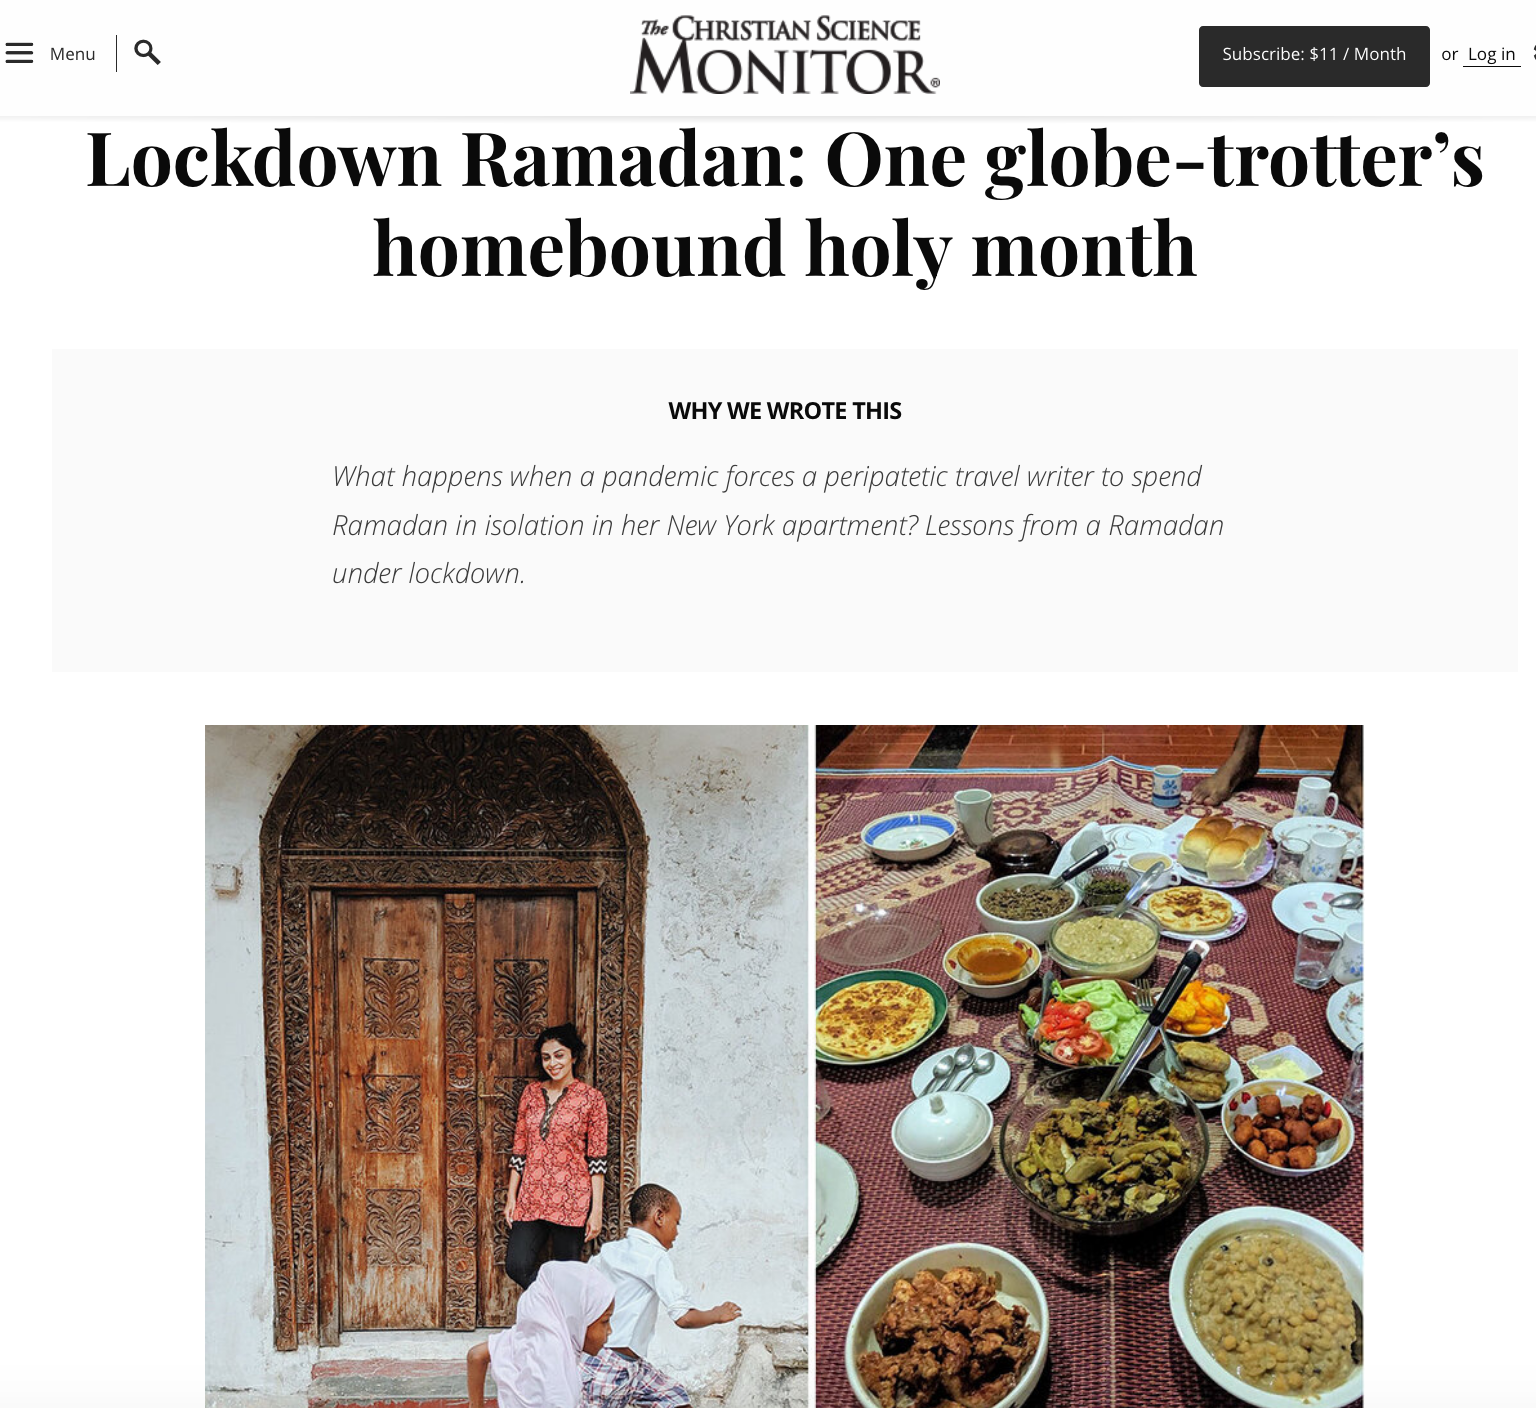 Christian Science Monitor: Lockdown Ramadan: One globe-trotter’s homebound holy month